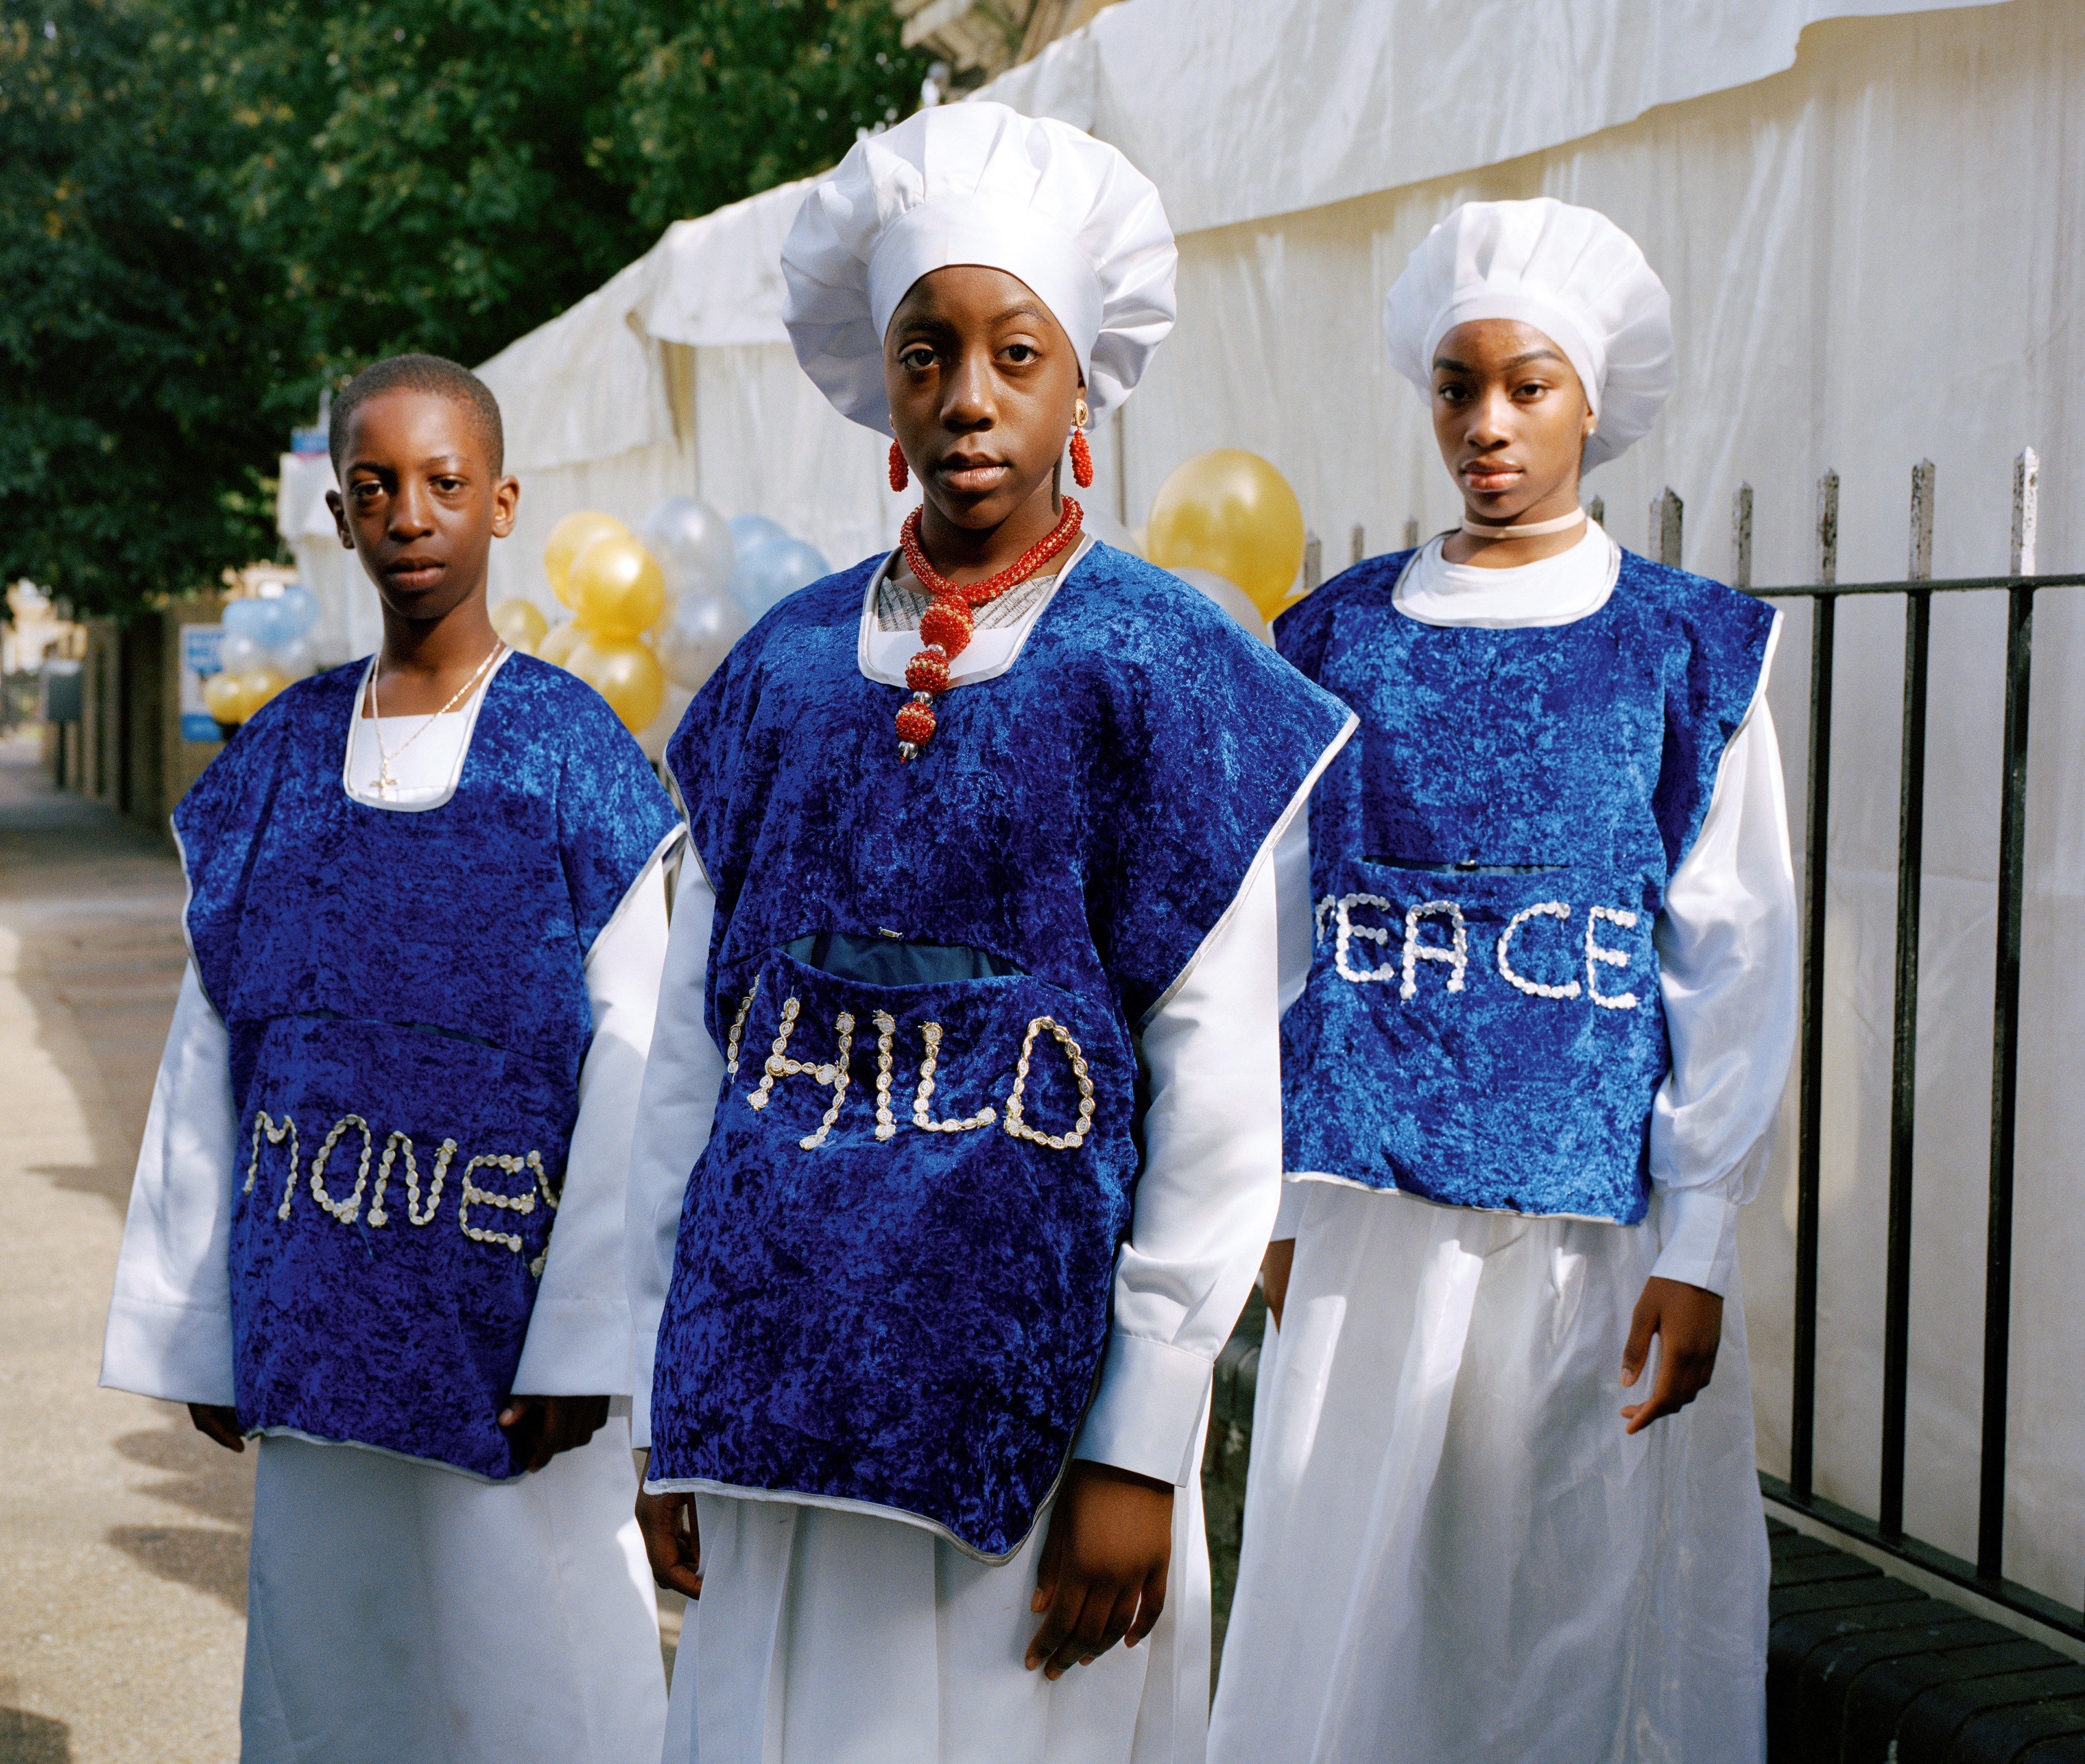 Josiah, Bukky and Lauren stand outside church on children’s anniversary service wearing clothing that reads Money, Child, Peace as they collect donations from their fellow congregants for charity. (Sophie Green)